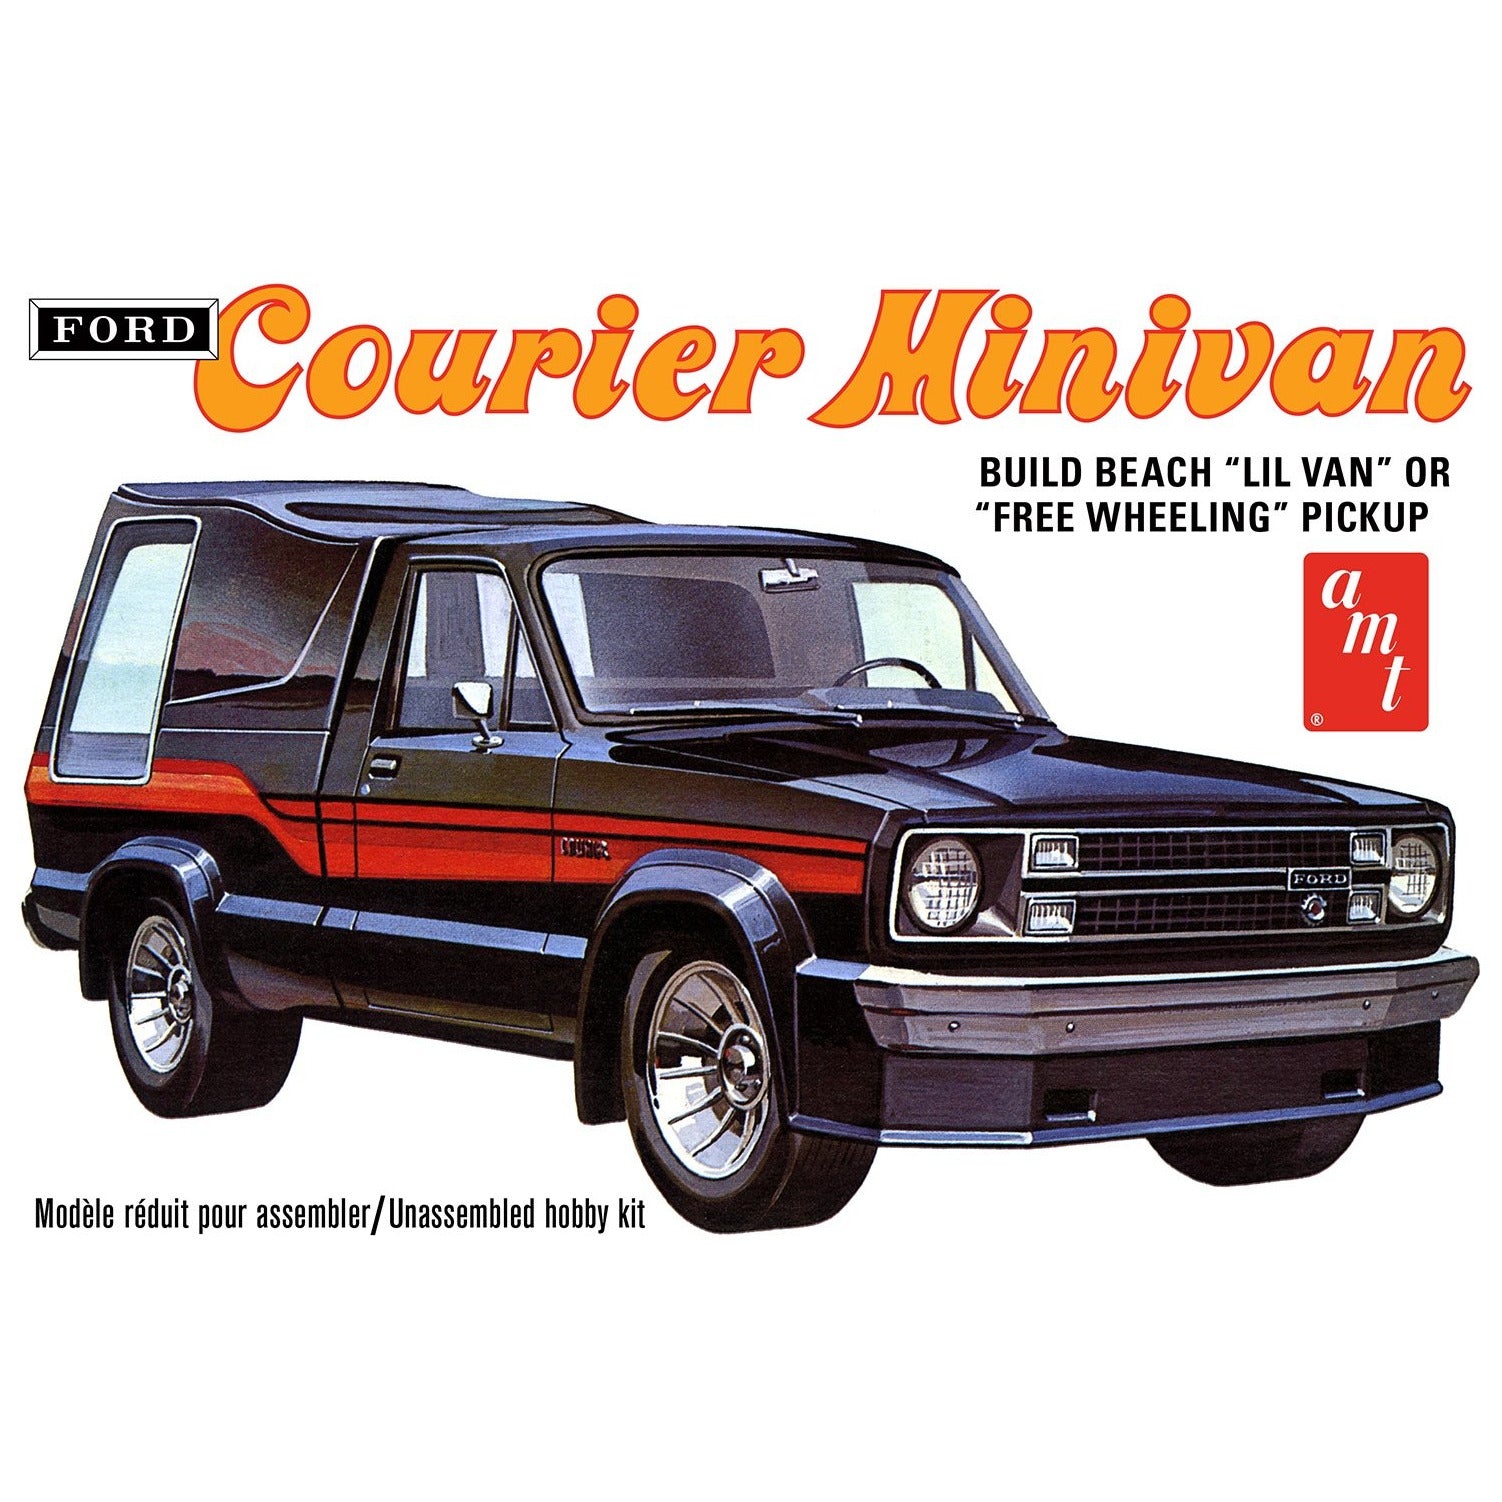 1978 Ford Courier Minivan 1/25 #1210 by AMT